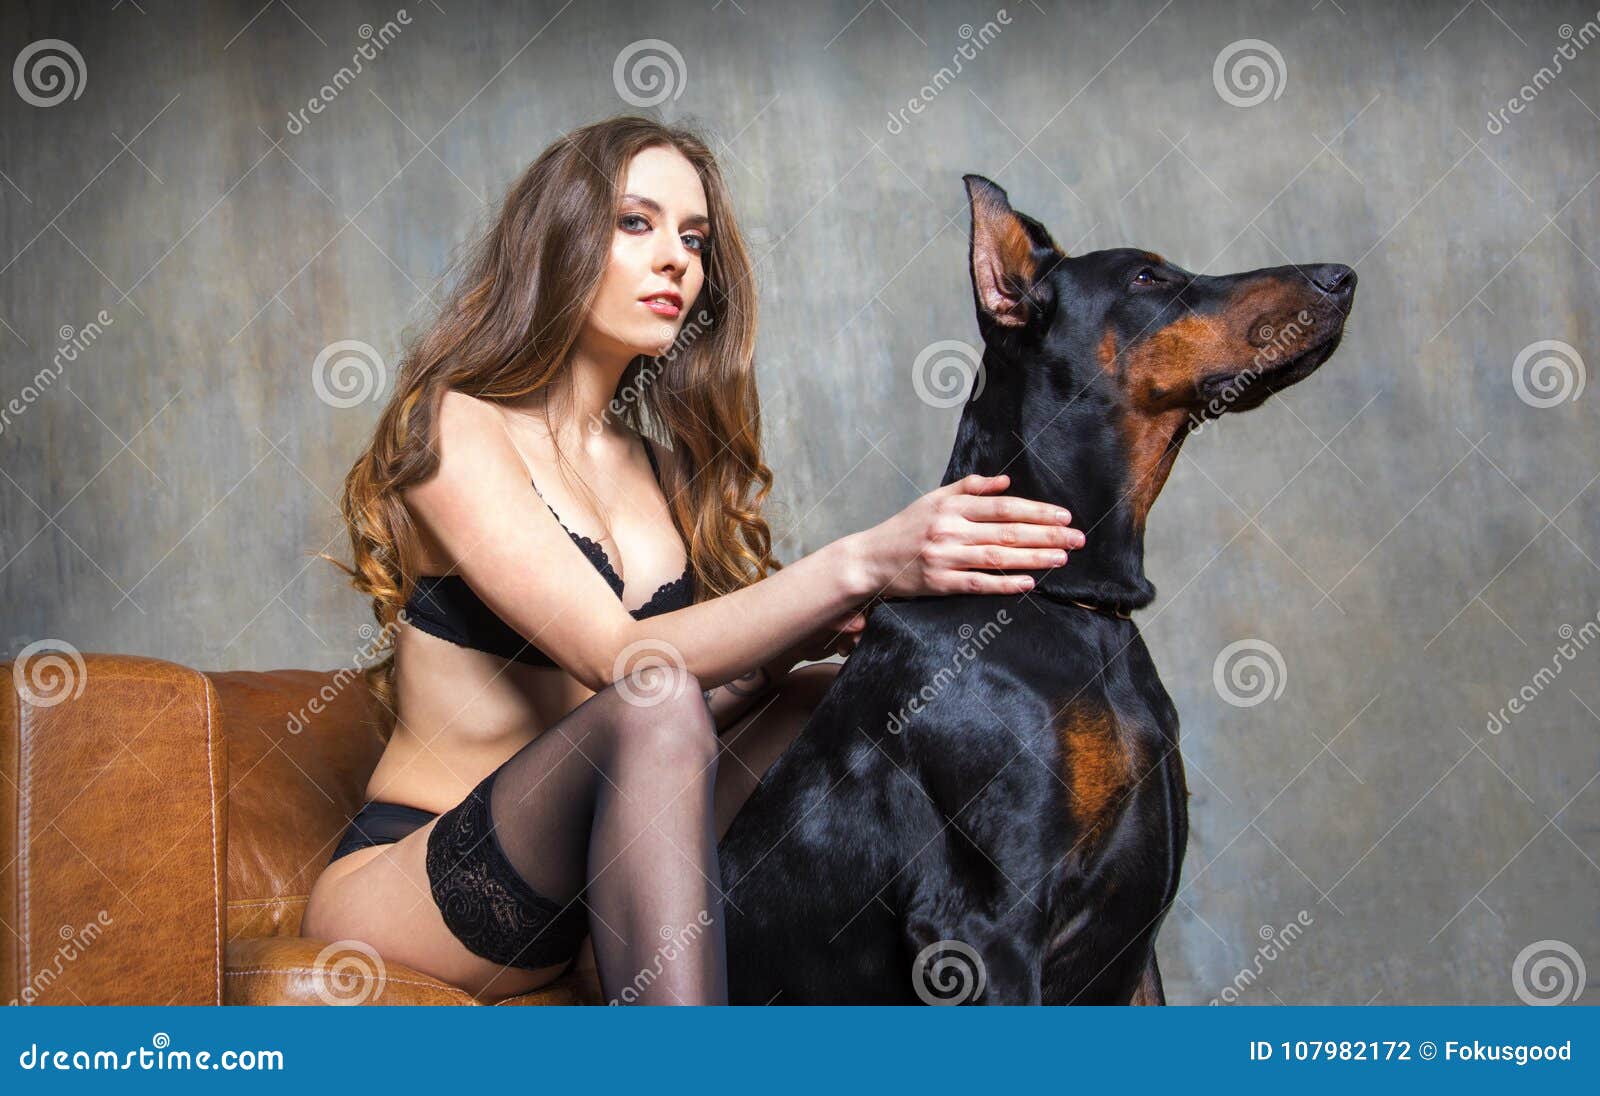 Pics dog and woman erotic All XXX